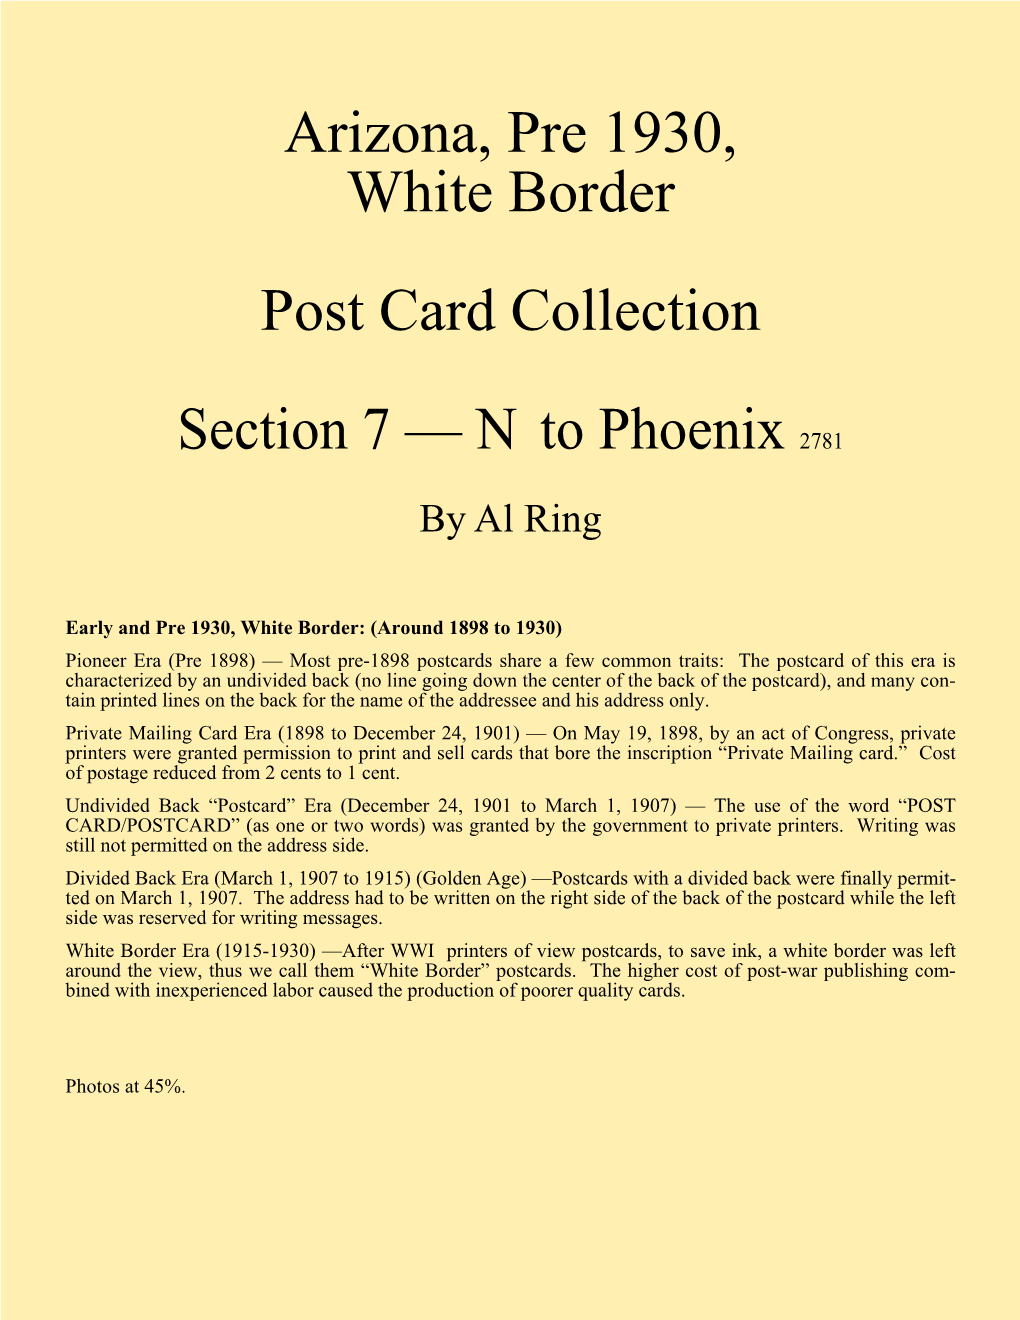 Arizona, Pre 1930, White Border Post Card Collection Section 7 — N To